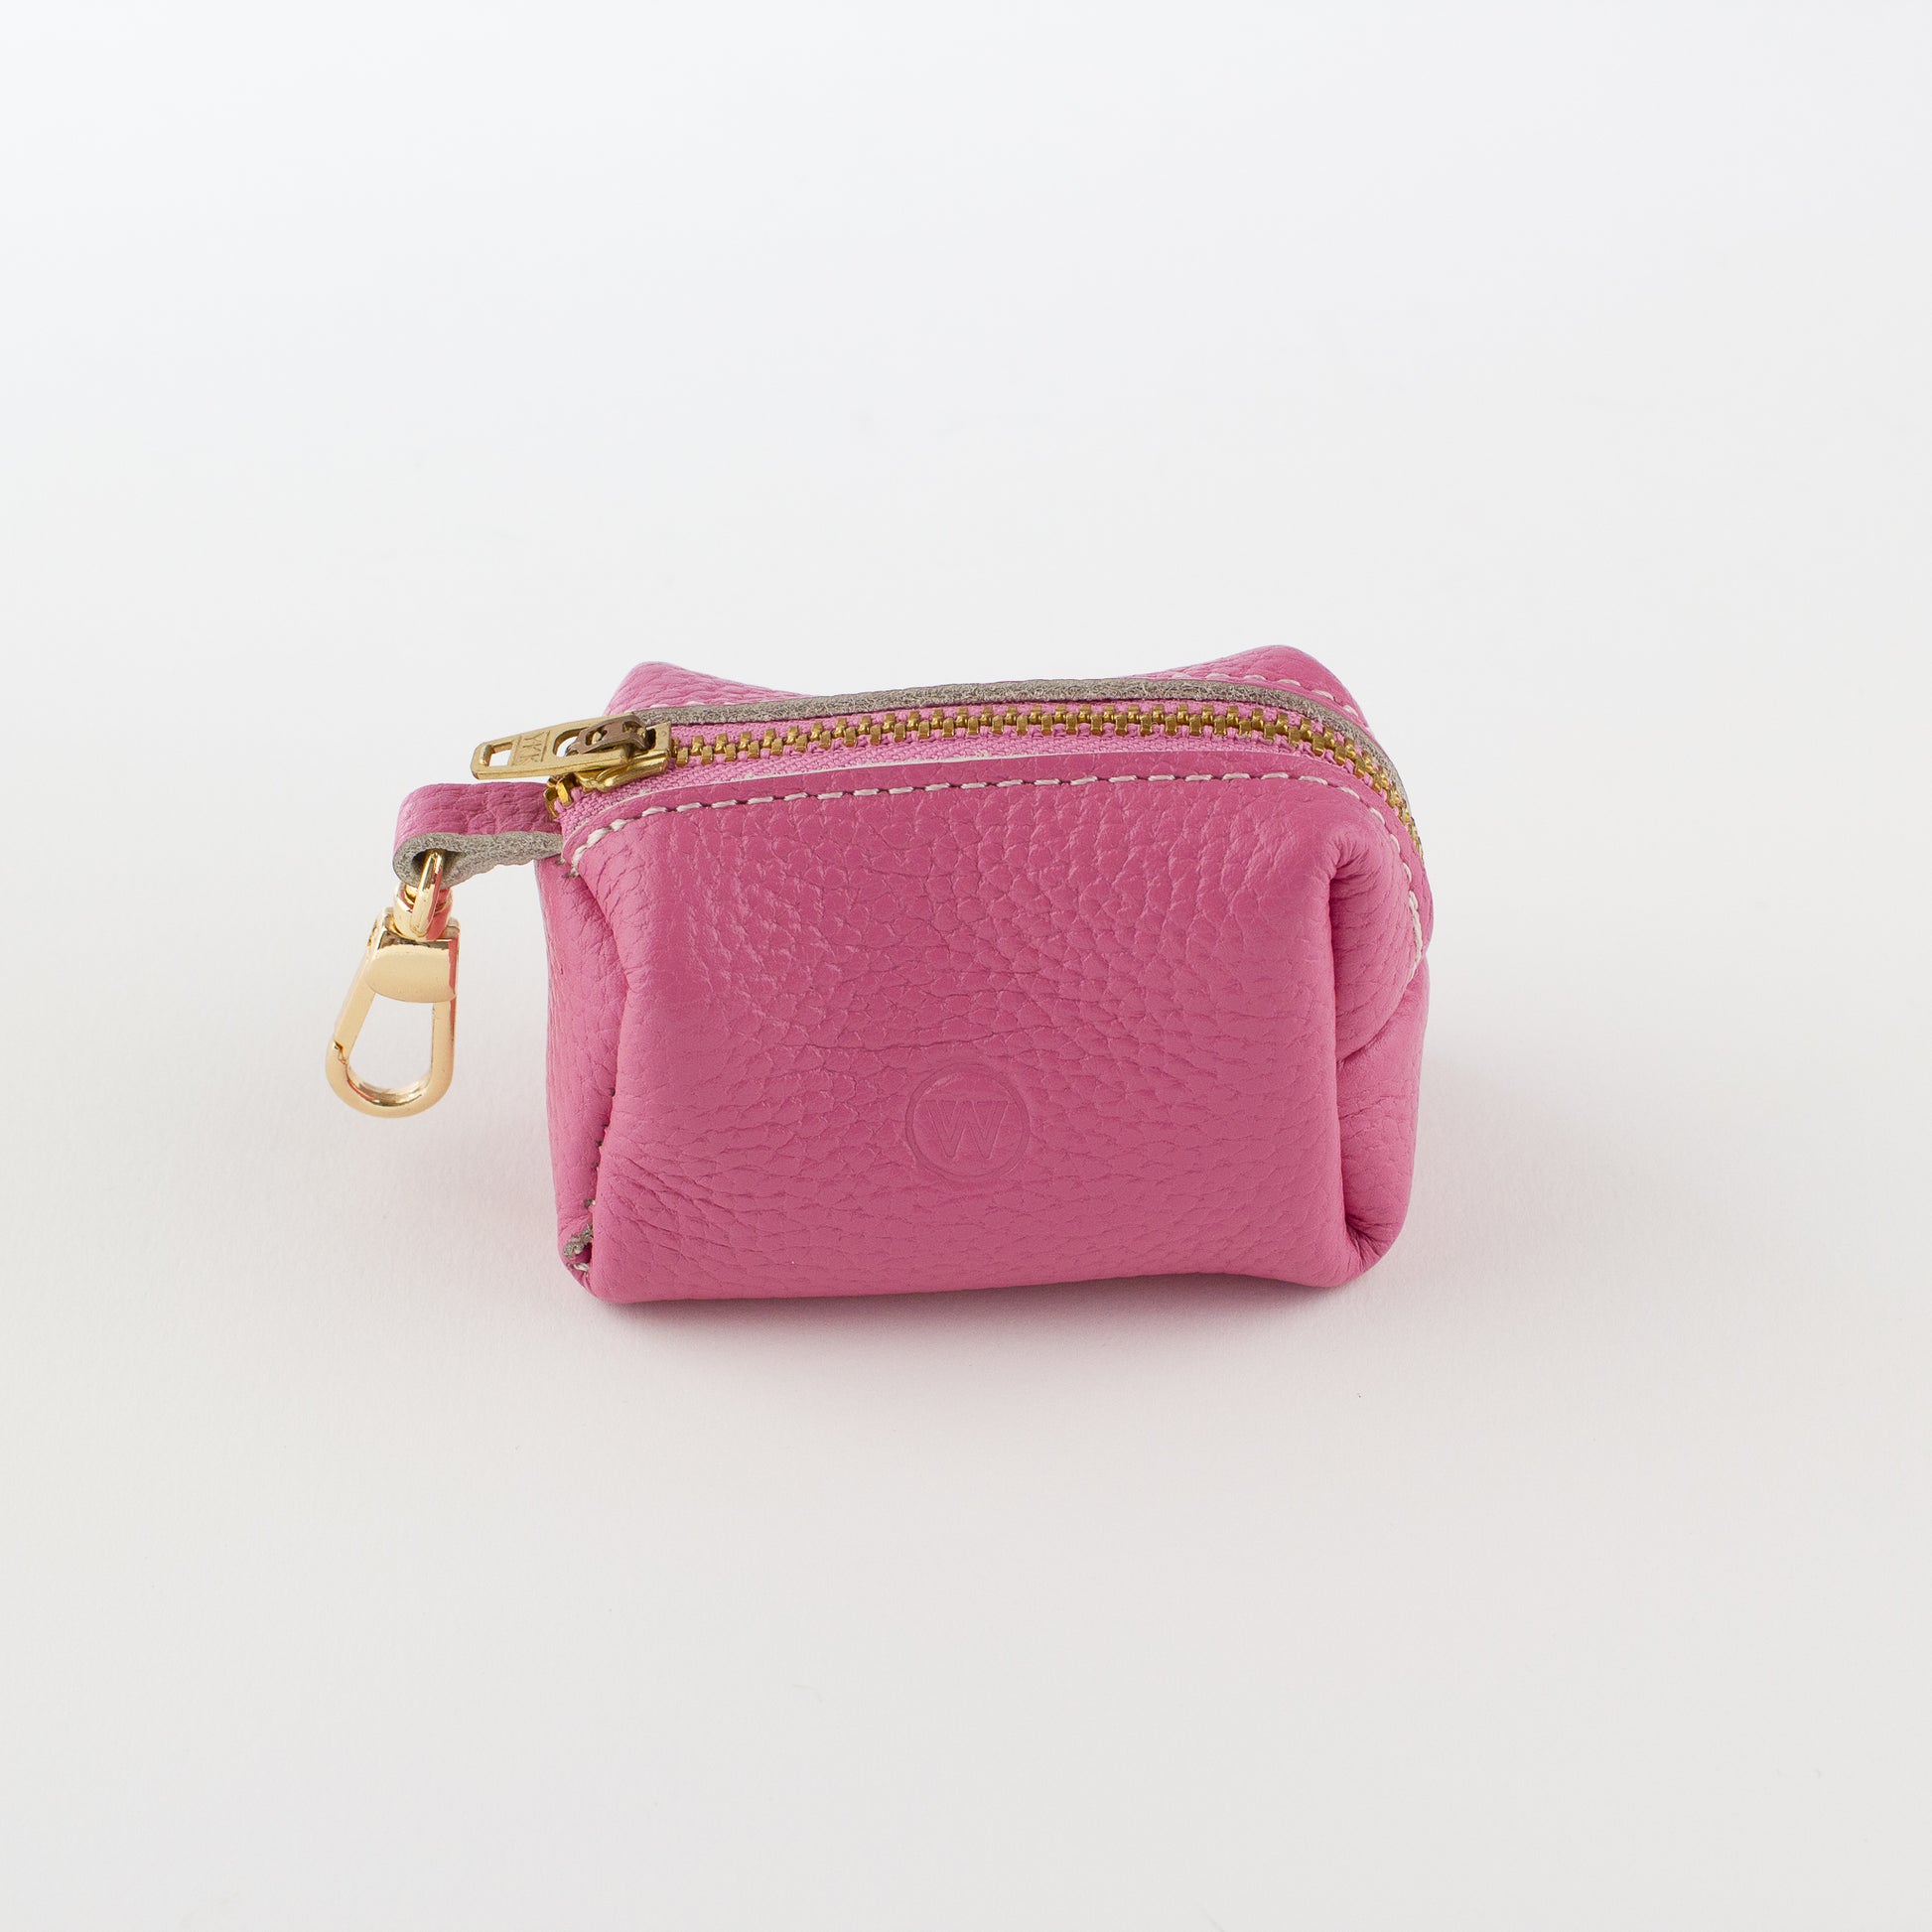 Pink leather poo bag Willow Walks